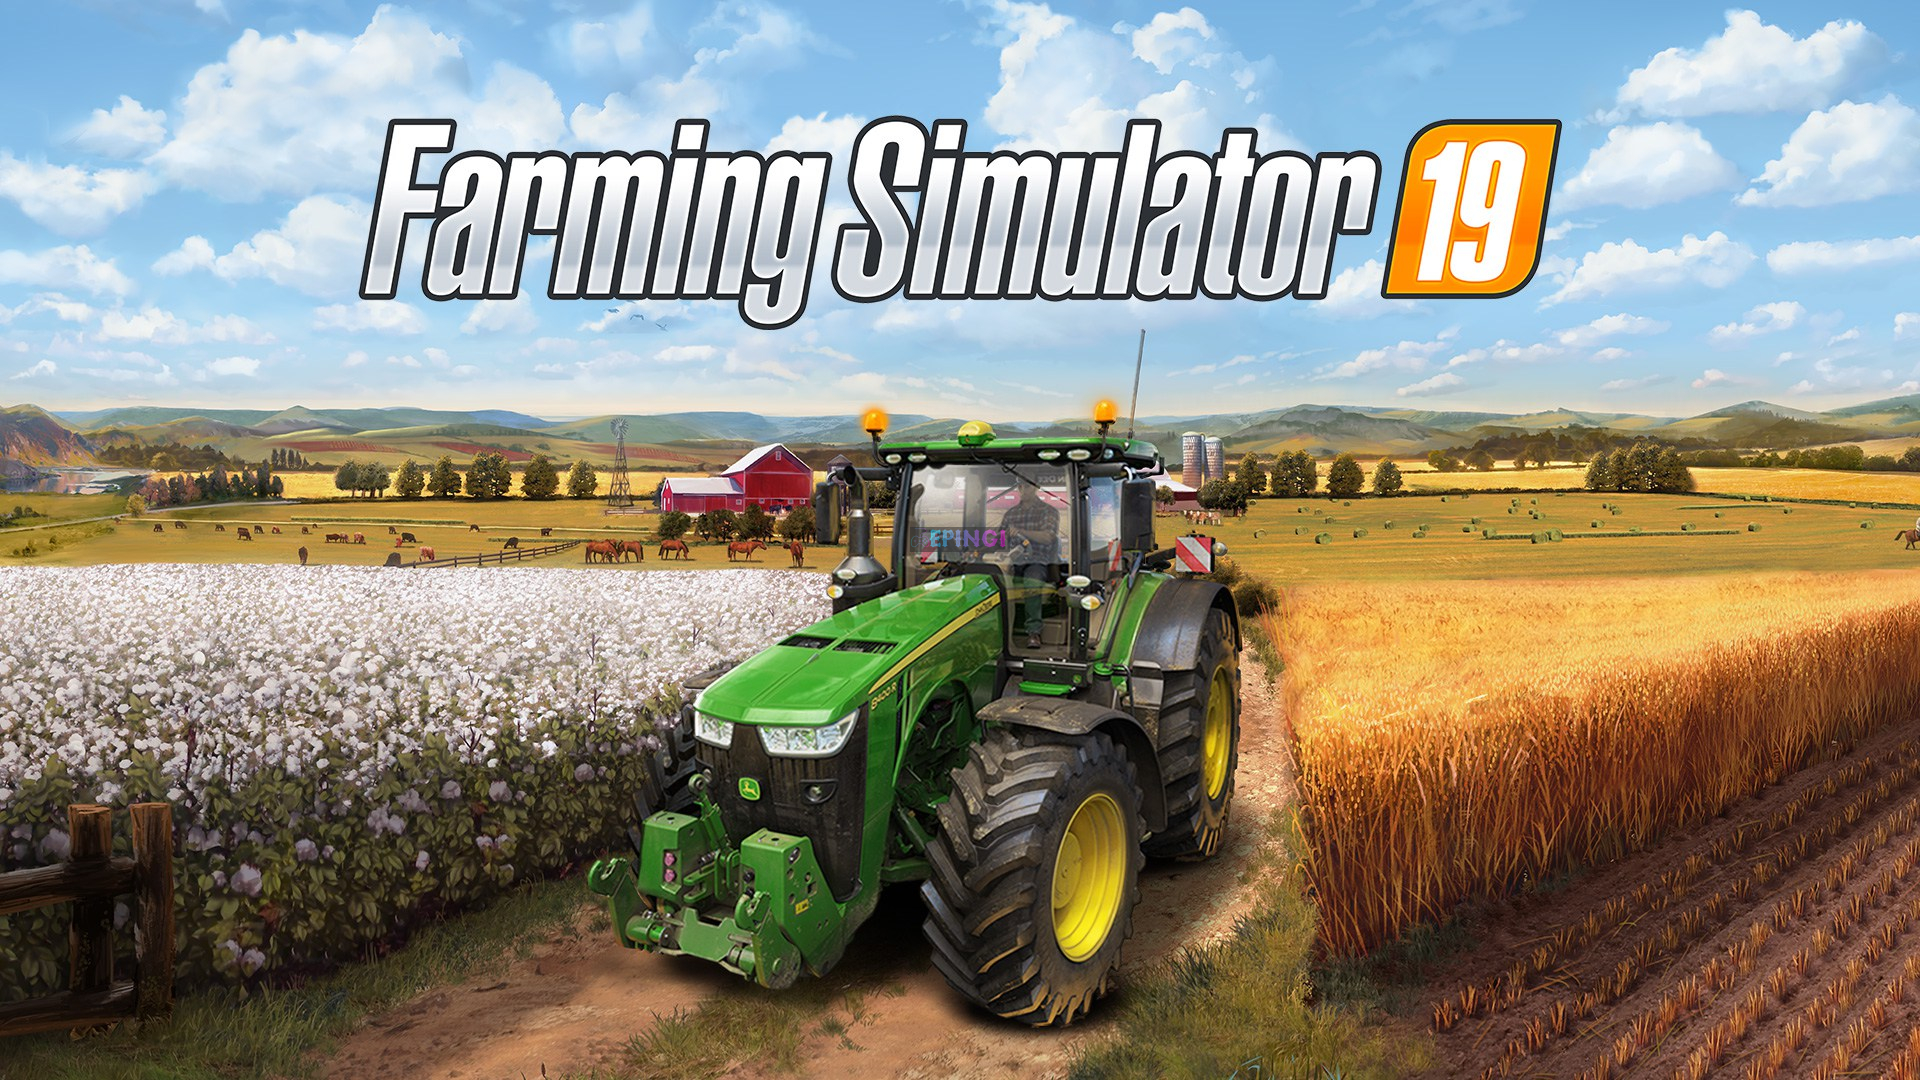 free simulation games for pc